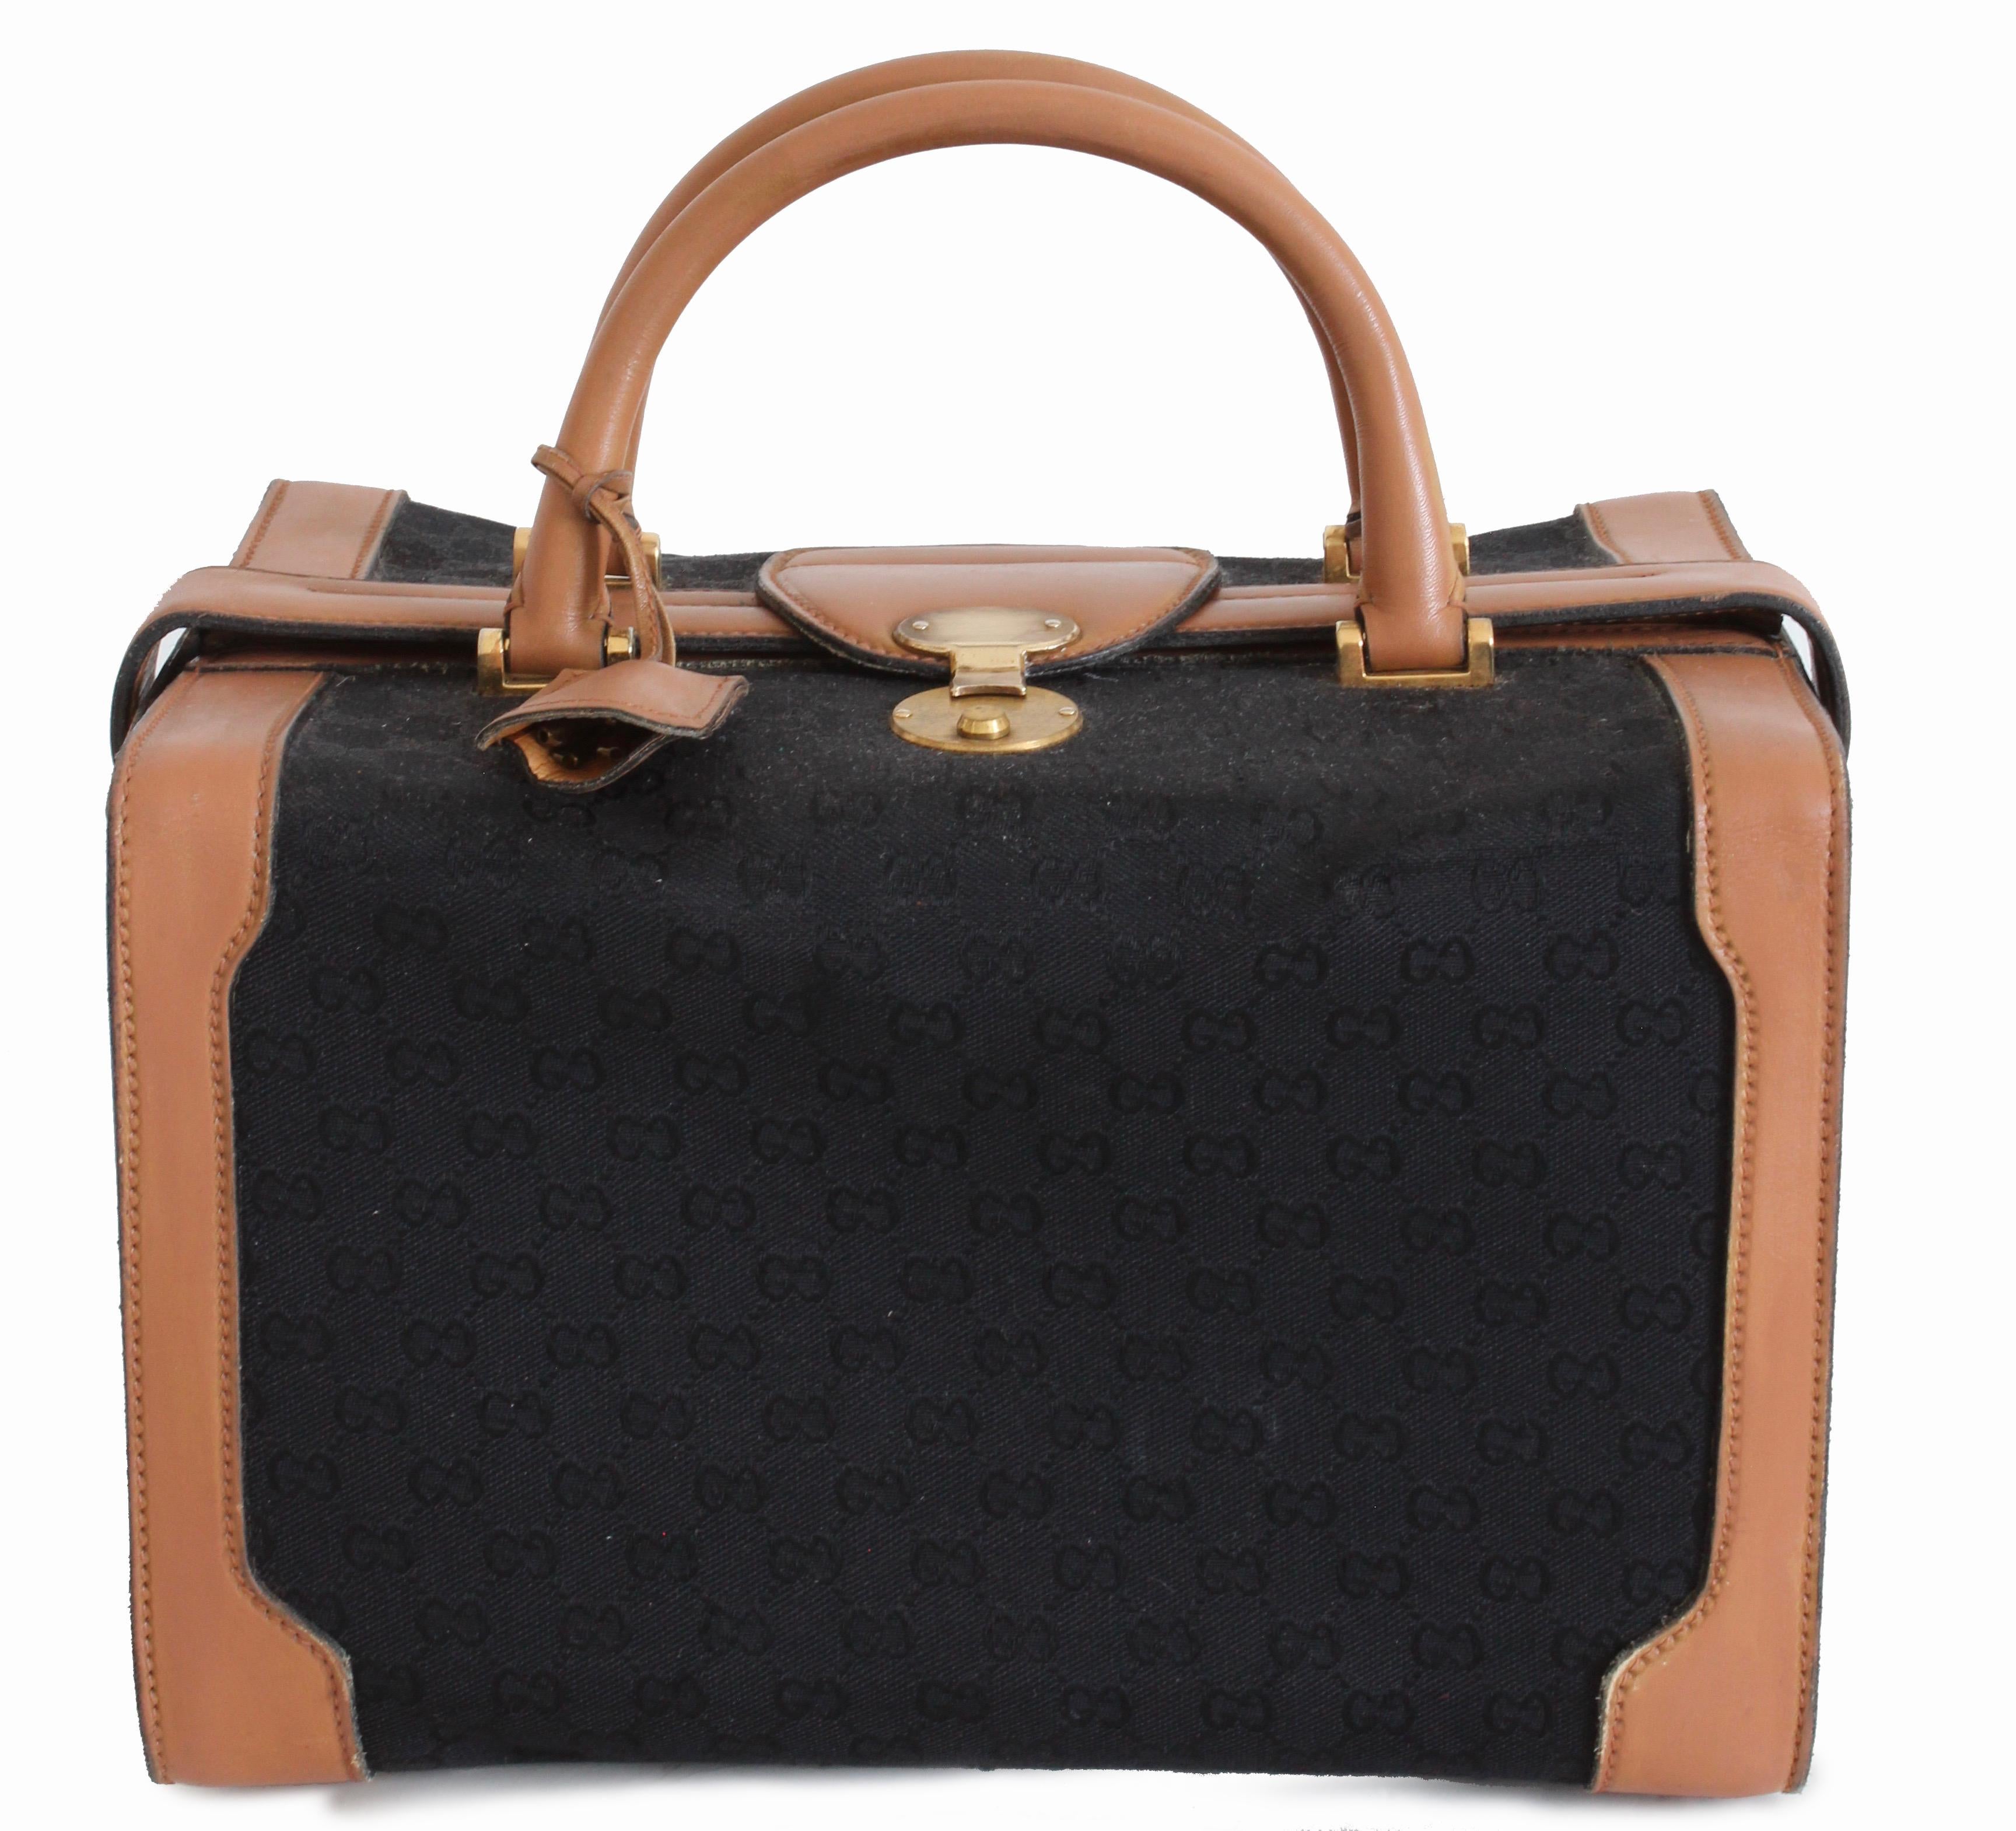 This super rare train case or vanity bag was made by GUCCI, most likely in the late 1970s.  Made from their monogram canvas in black, it features tan leather trim and a doctors bag construction.  The interior is lined in leatherette fabric and